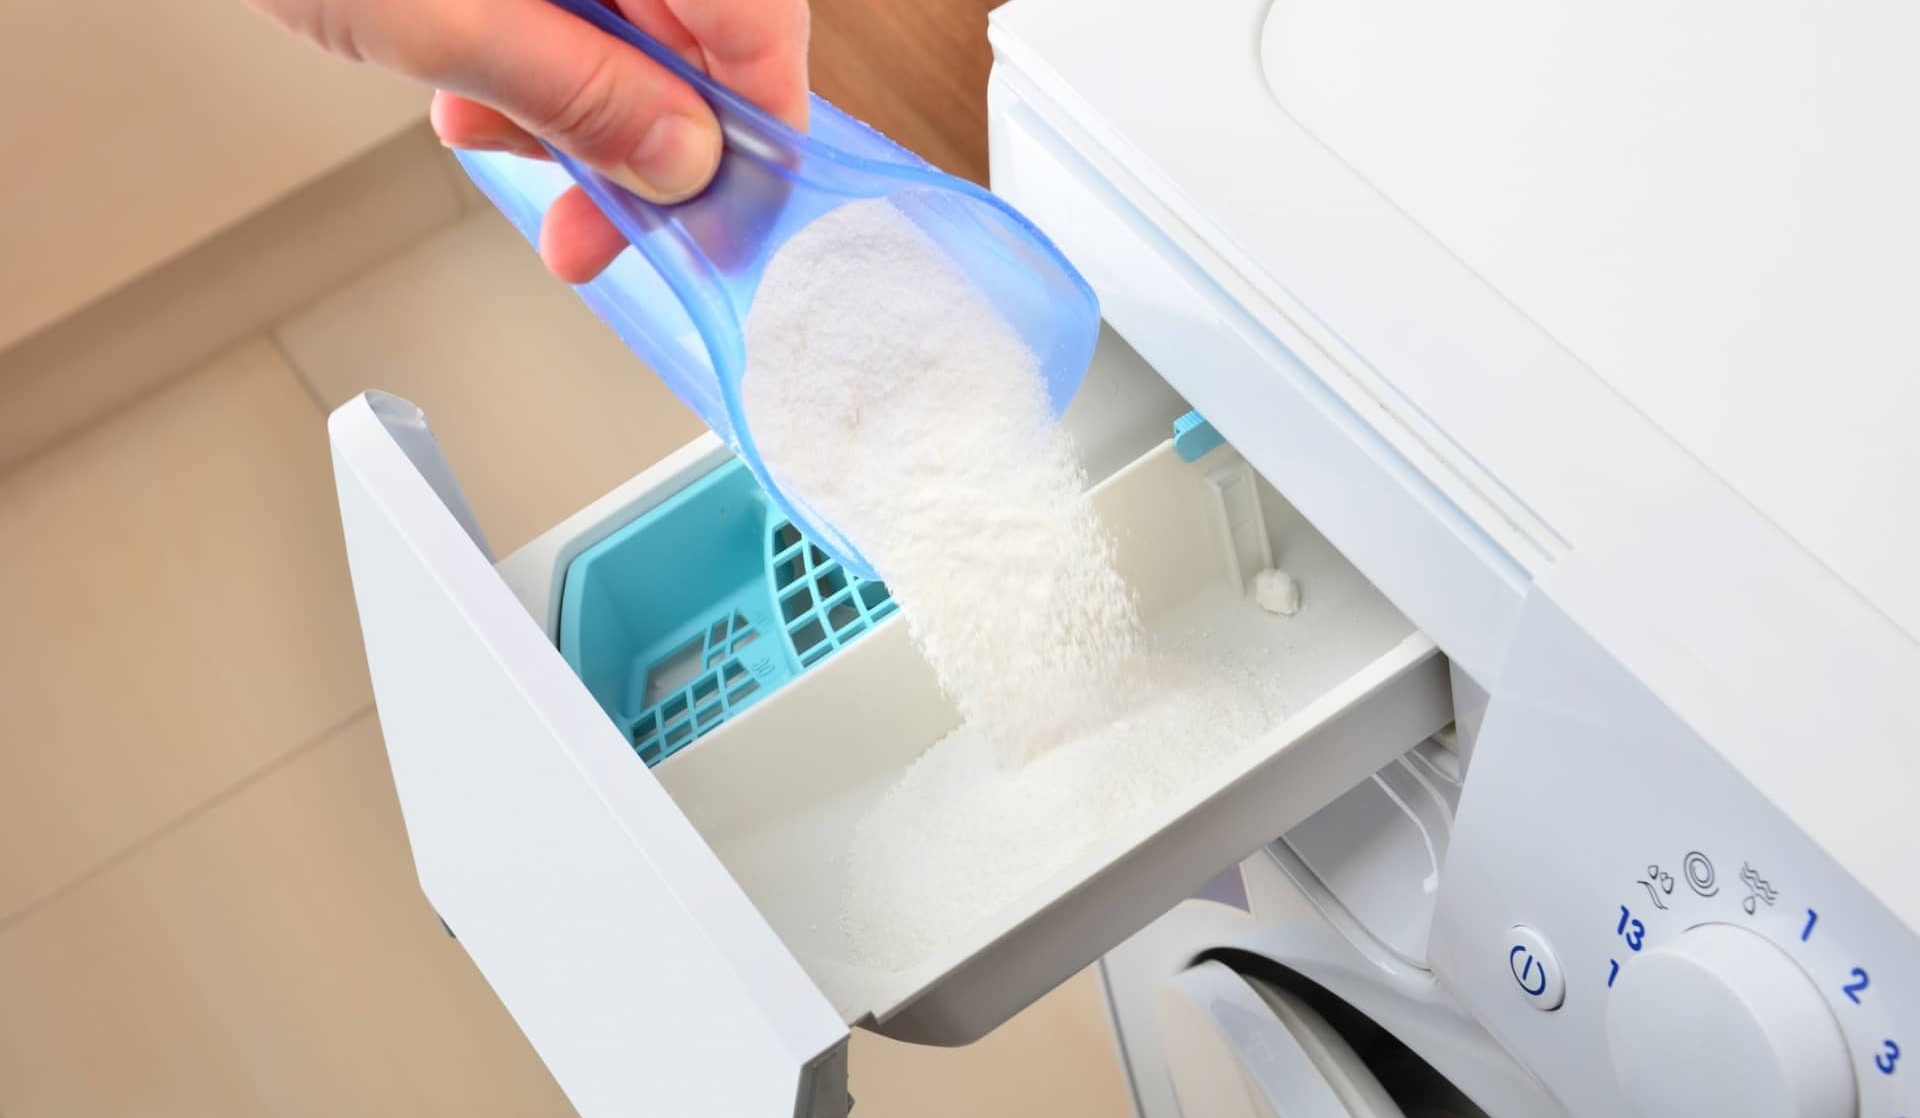  Buy Automatic laundry powder detergent at an Exceptional Price 